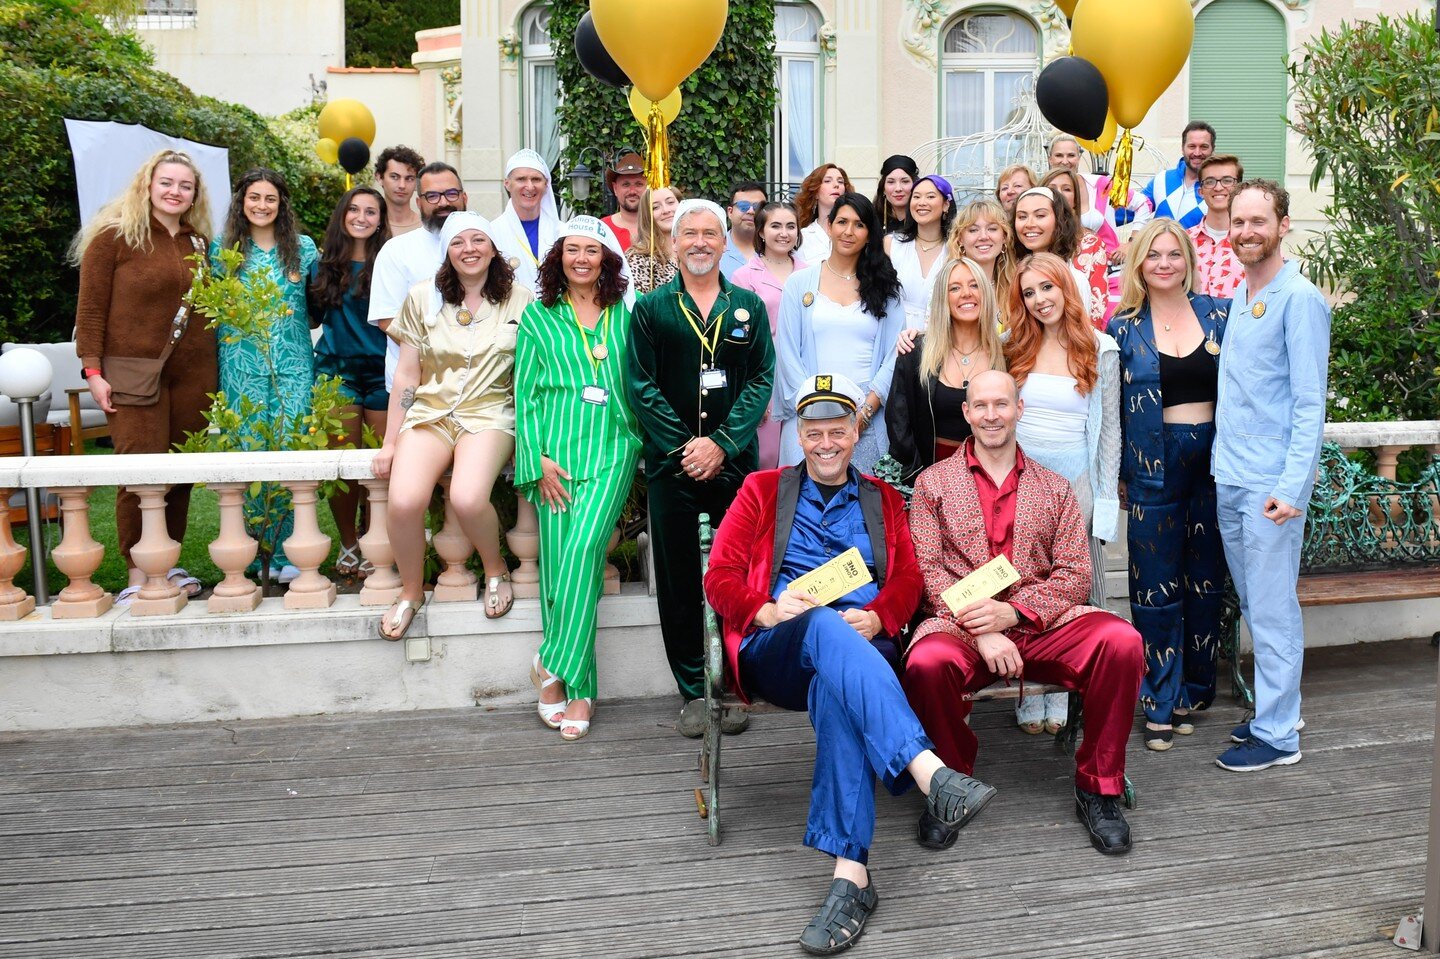 TEAM CANNES PJ PARTY 2023! 

Thanks to everyone who was involved in making this magical event possible - from our hosts @maximjago and @debordedave to our sponsors, volunteers, partners @juliashouse and @awarenessties, managers and organisers @luuney